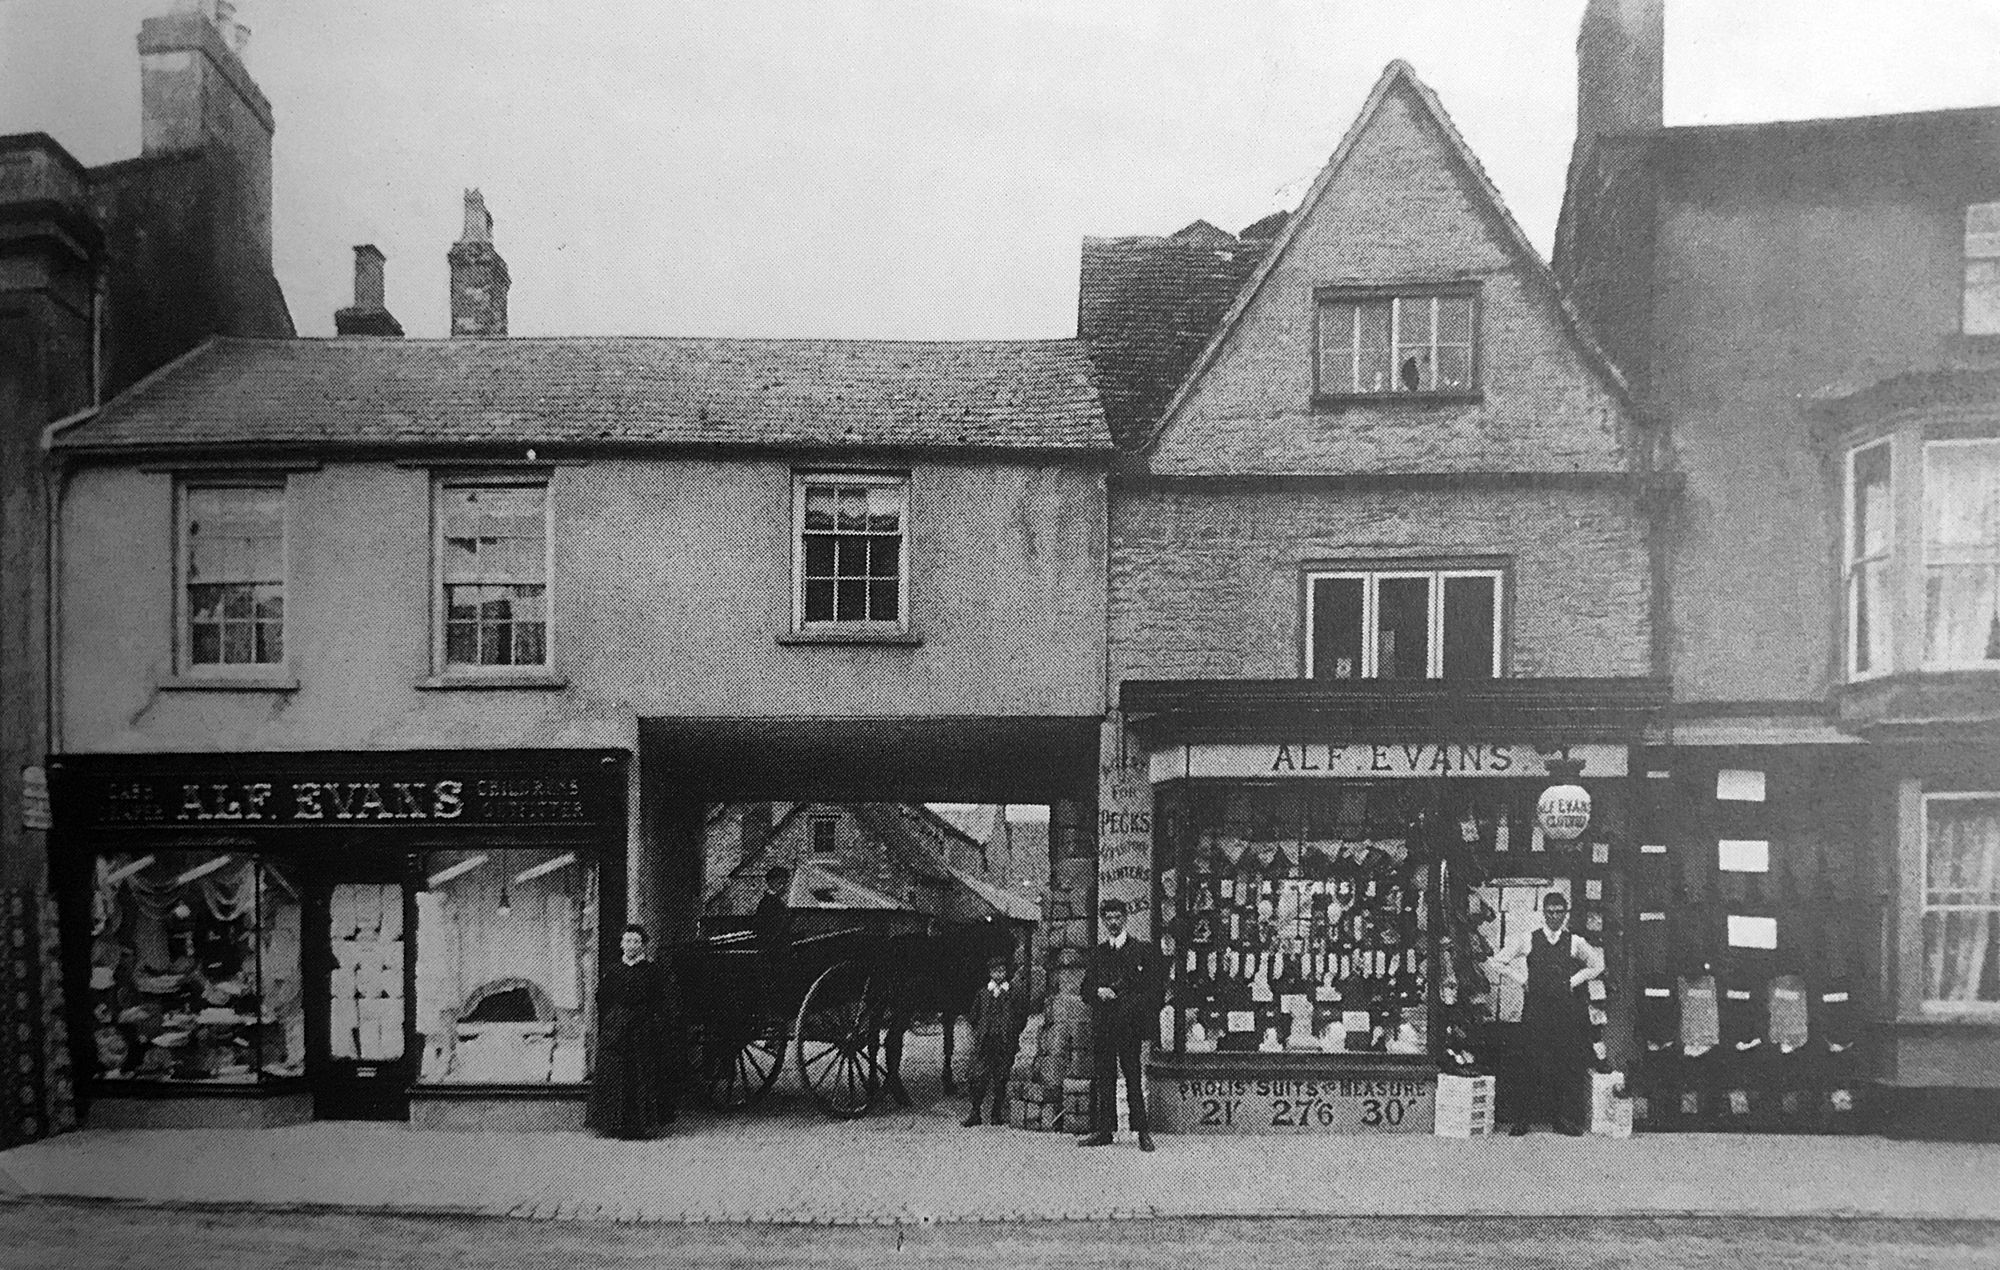 The two shops either side of Evans Yard, 1910s.